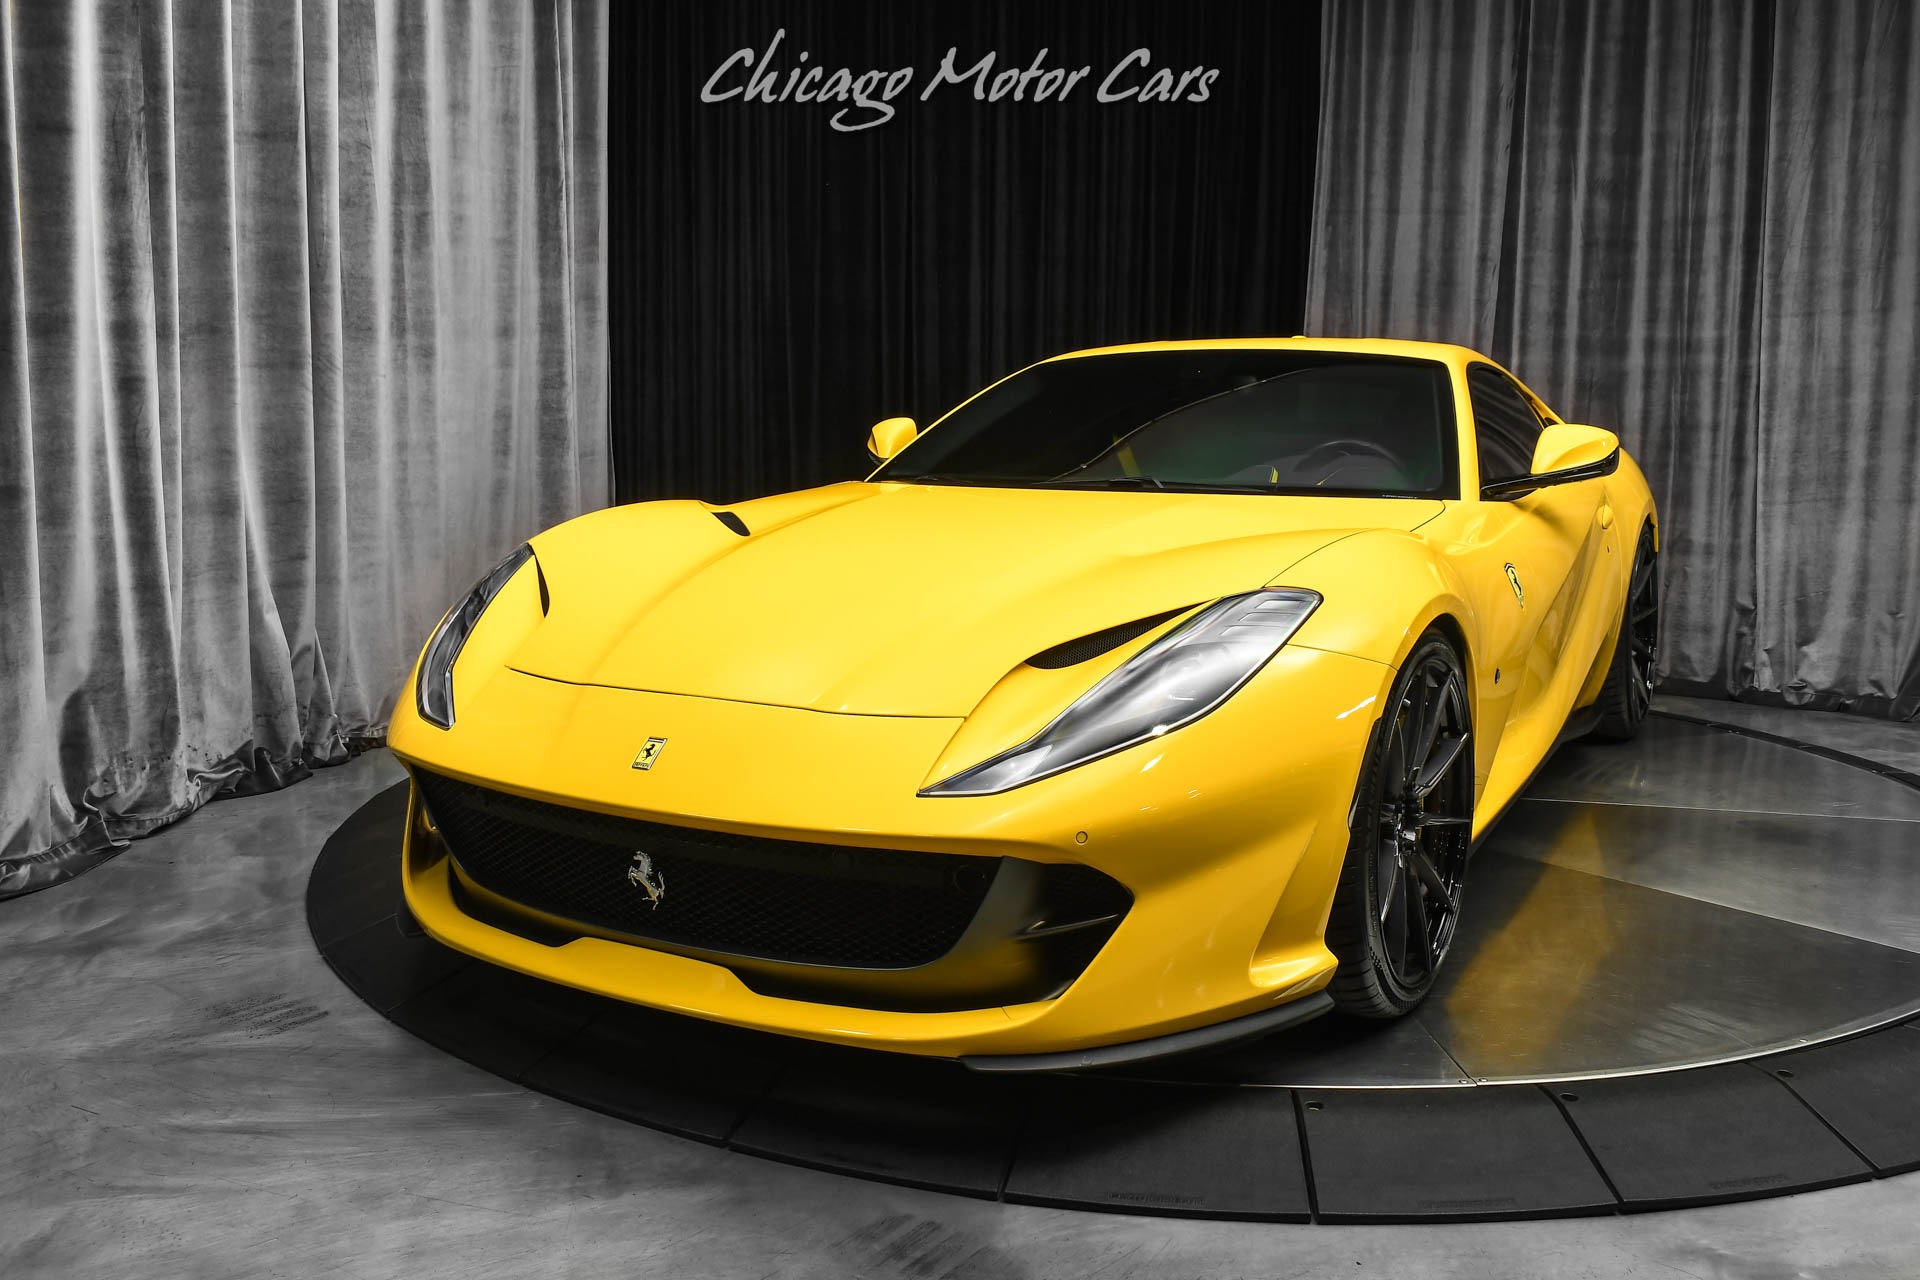 Used-2018-Ferrari-812-Superfast-Only-8K-Miles-Carbon-Race-Seats-Front-Lift-Carbon-Wheel-W-LEDs